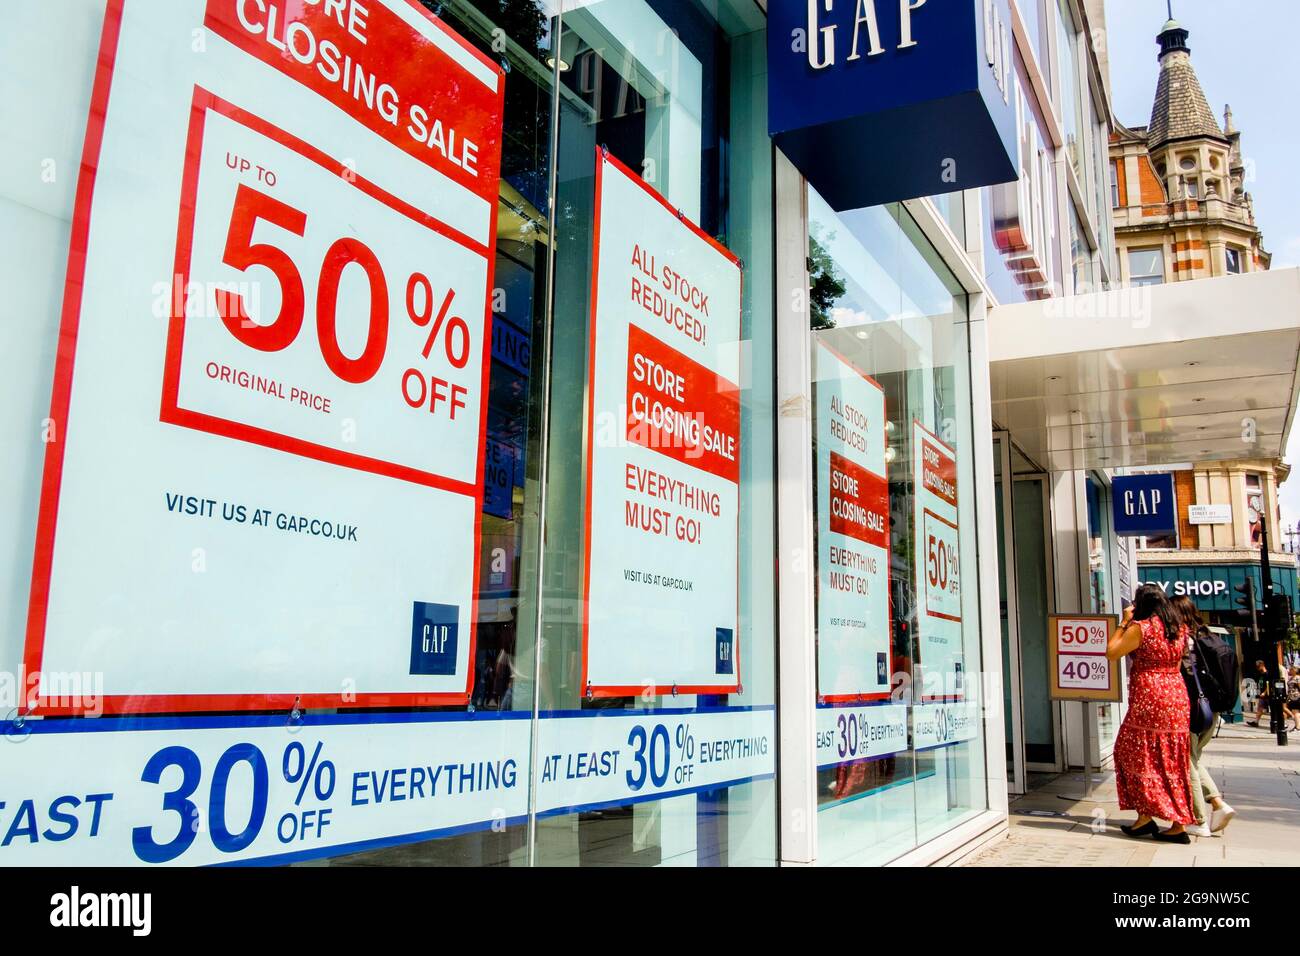 GAP flagship store in Oxford street, London, one of the clothing retailer's  81 stores in the UK that are scheduled for closure in 2021 Stock Photo -  Alamy